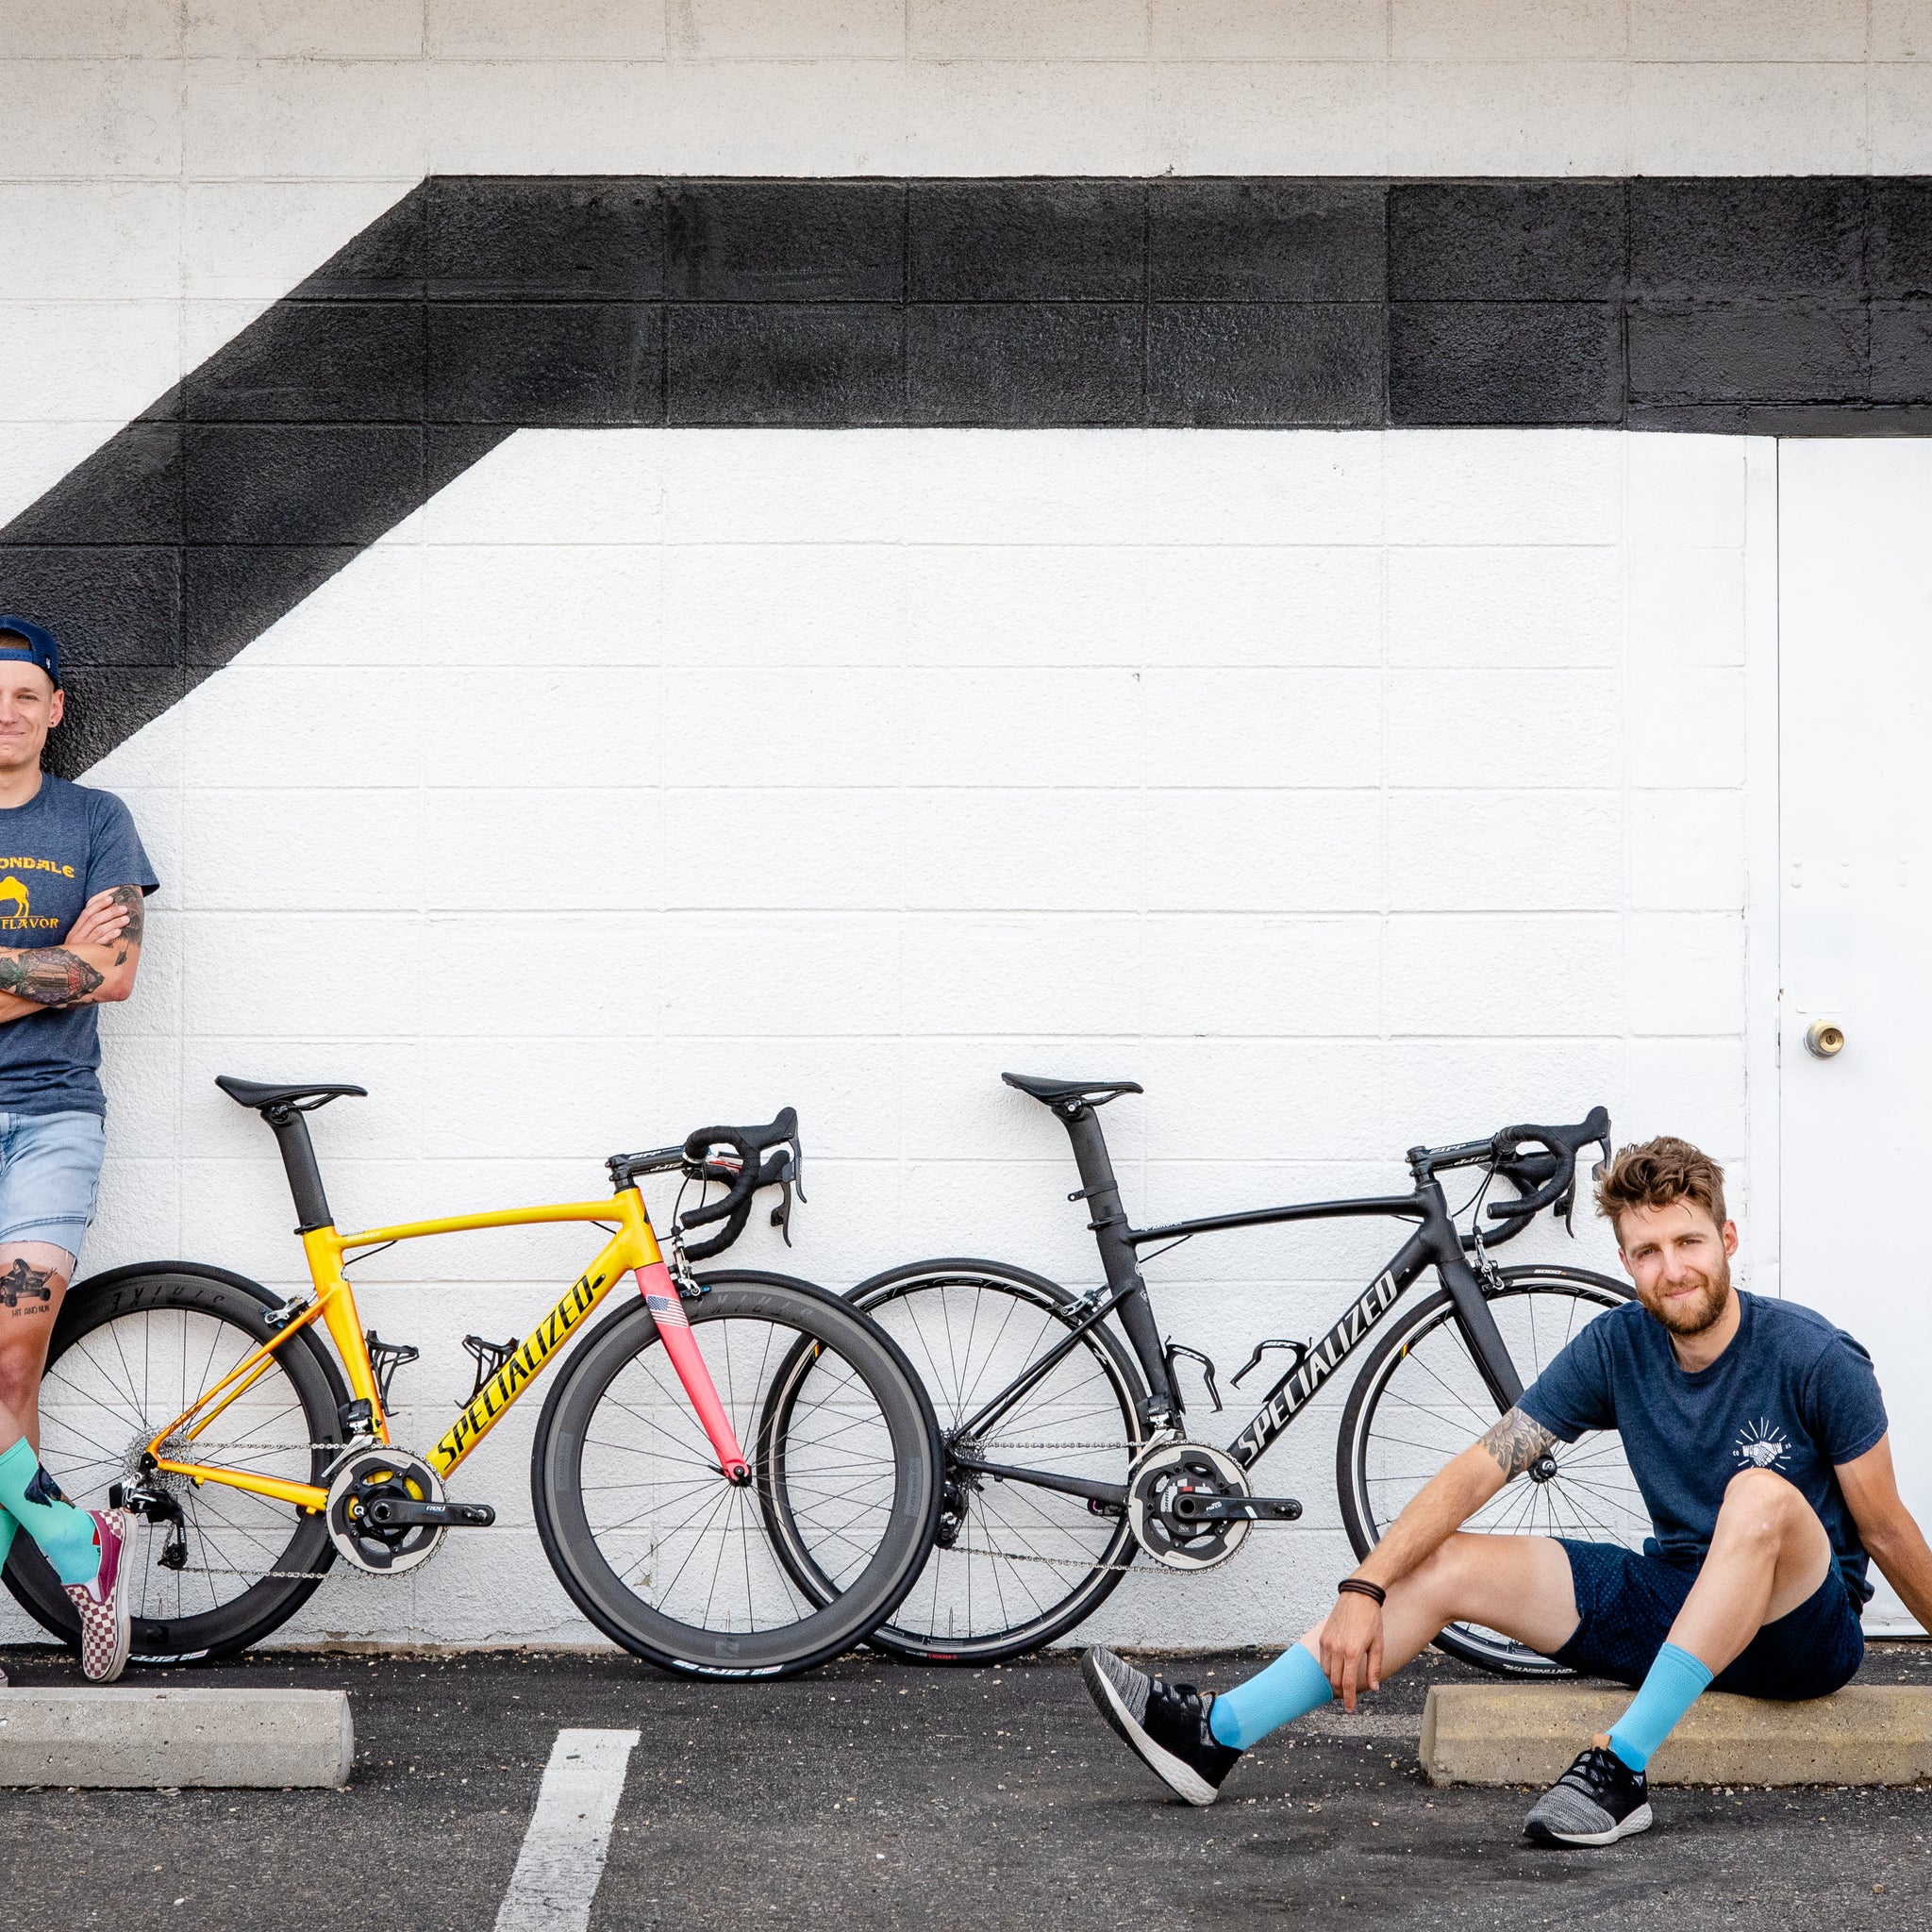 How to Race a Crit & Bike Setup: Tips for Beginners from our Ace Riders